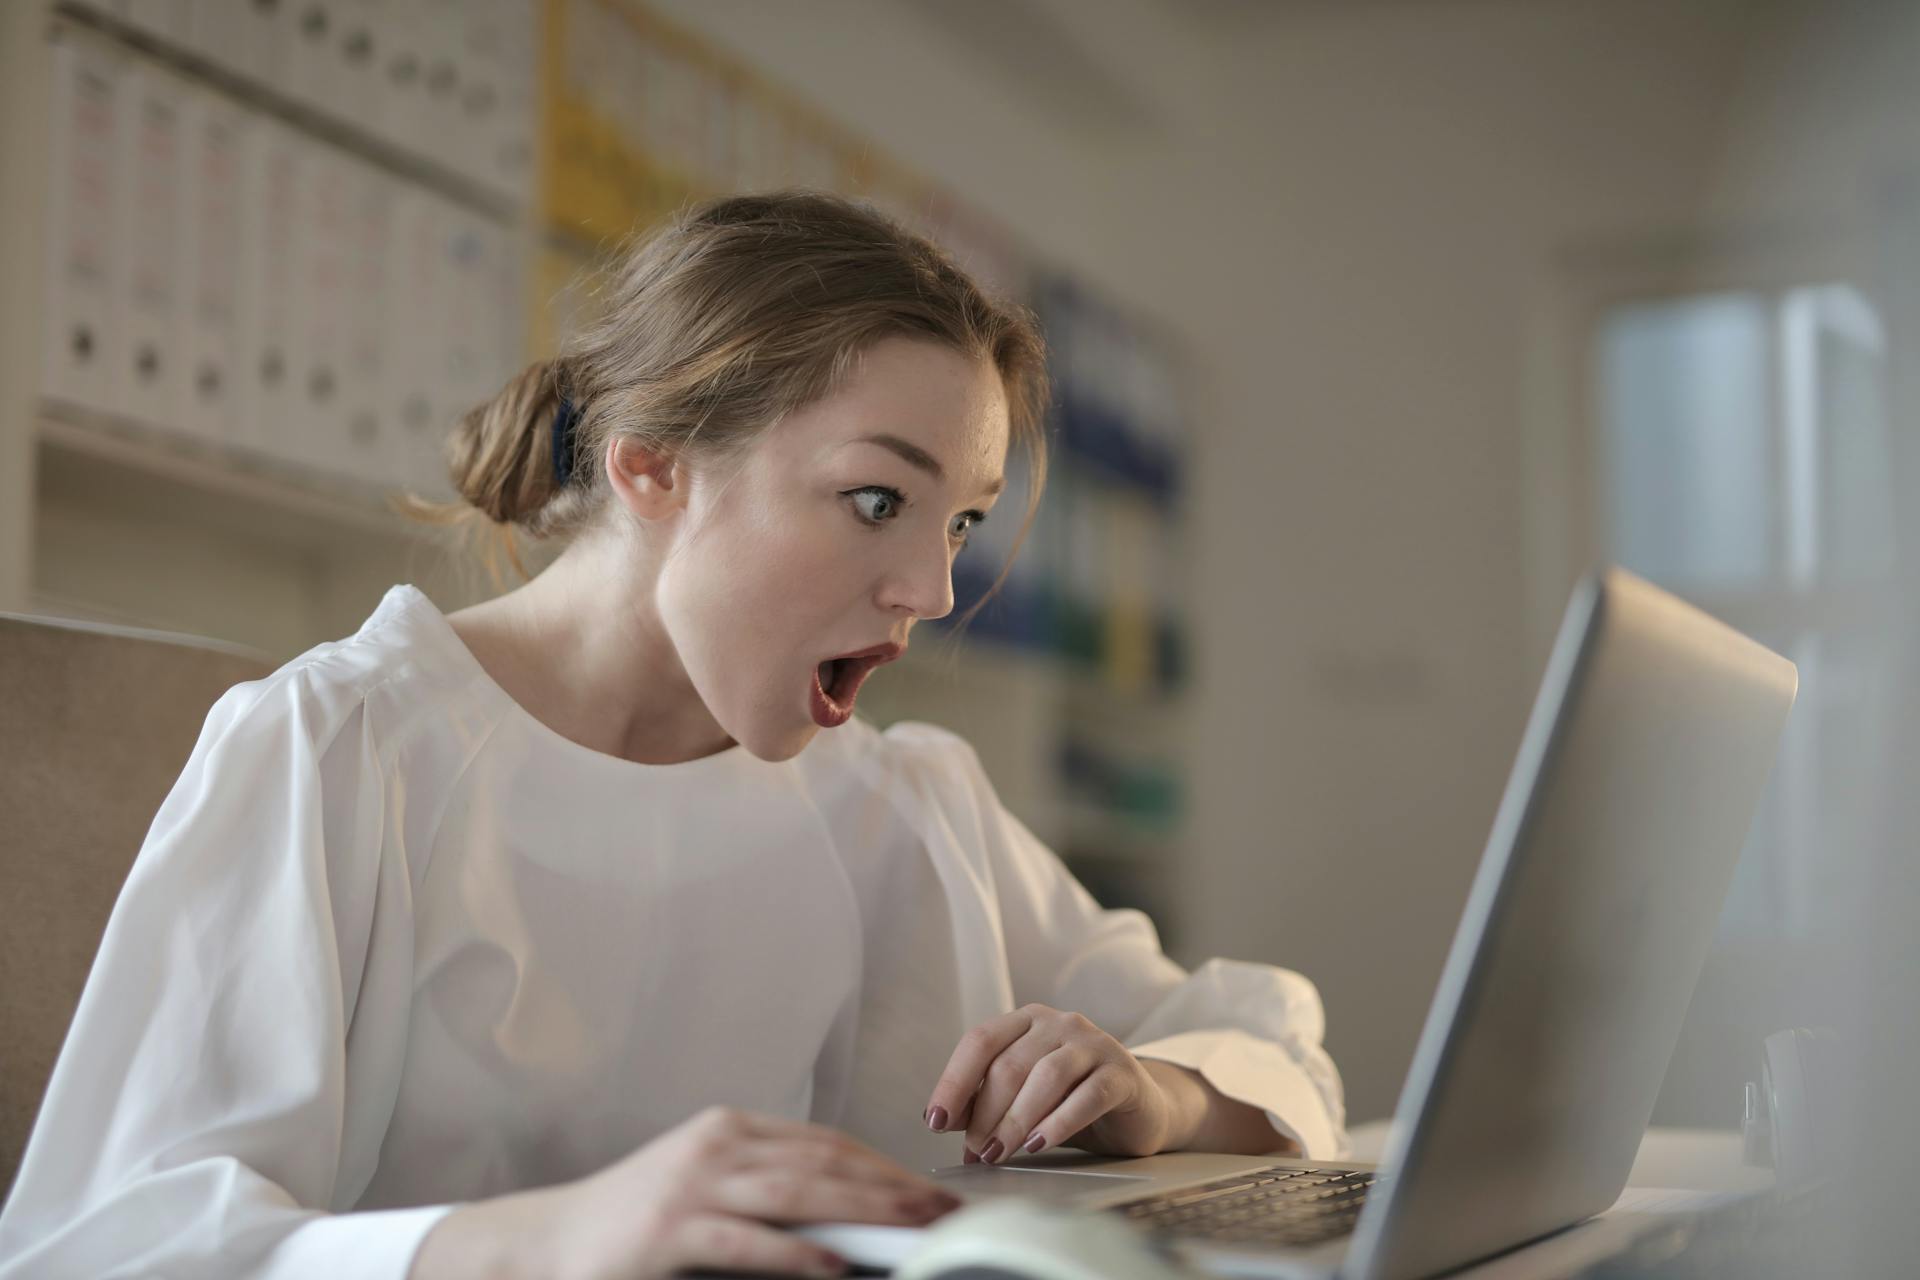 A woman shocked while looking at a laptop screen | Source: Pexels